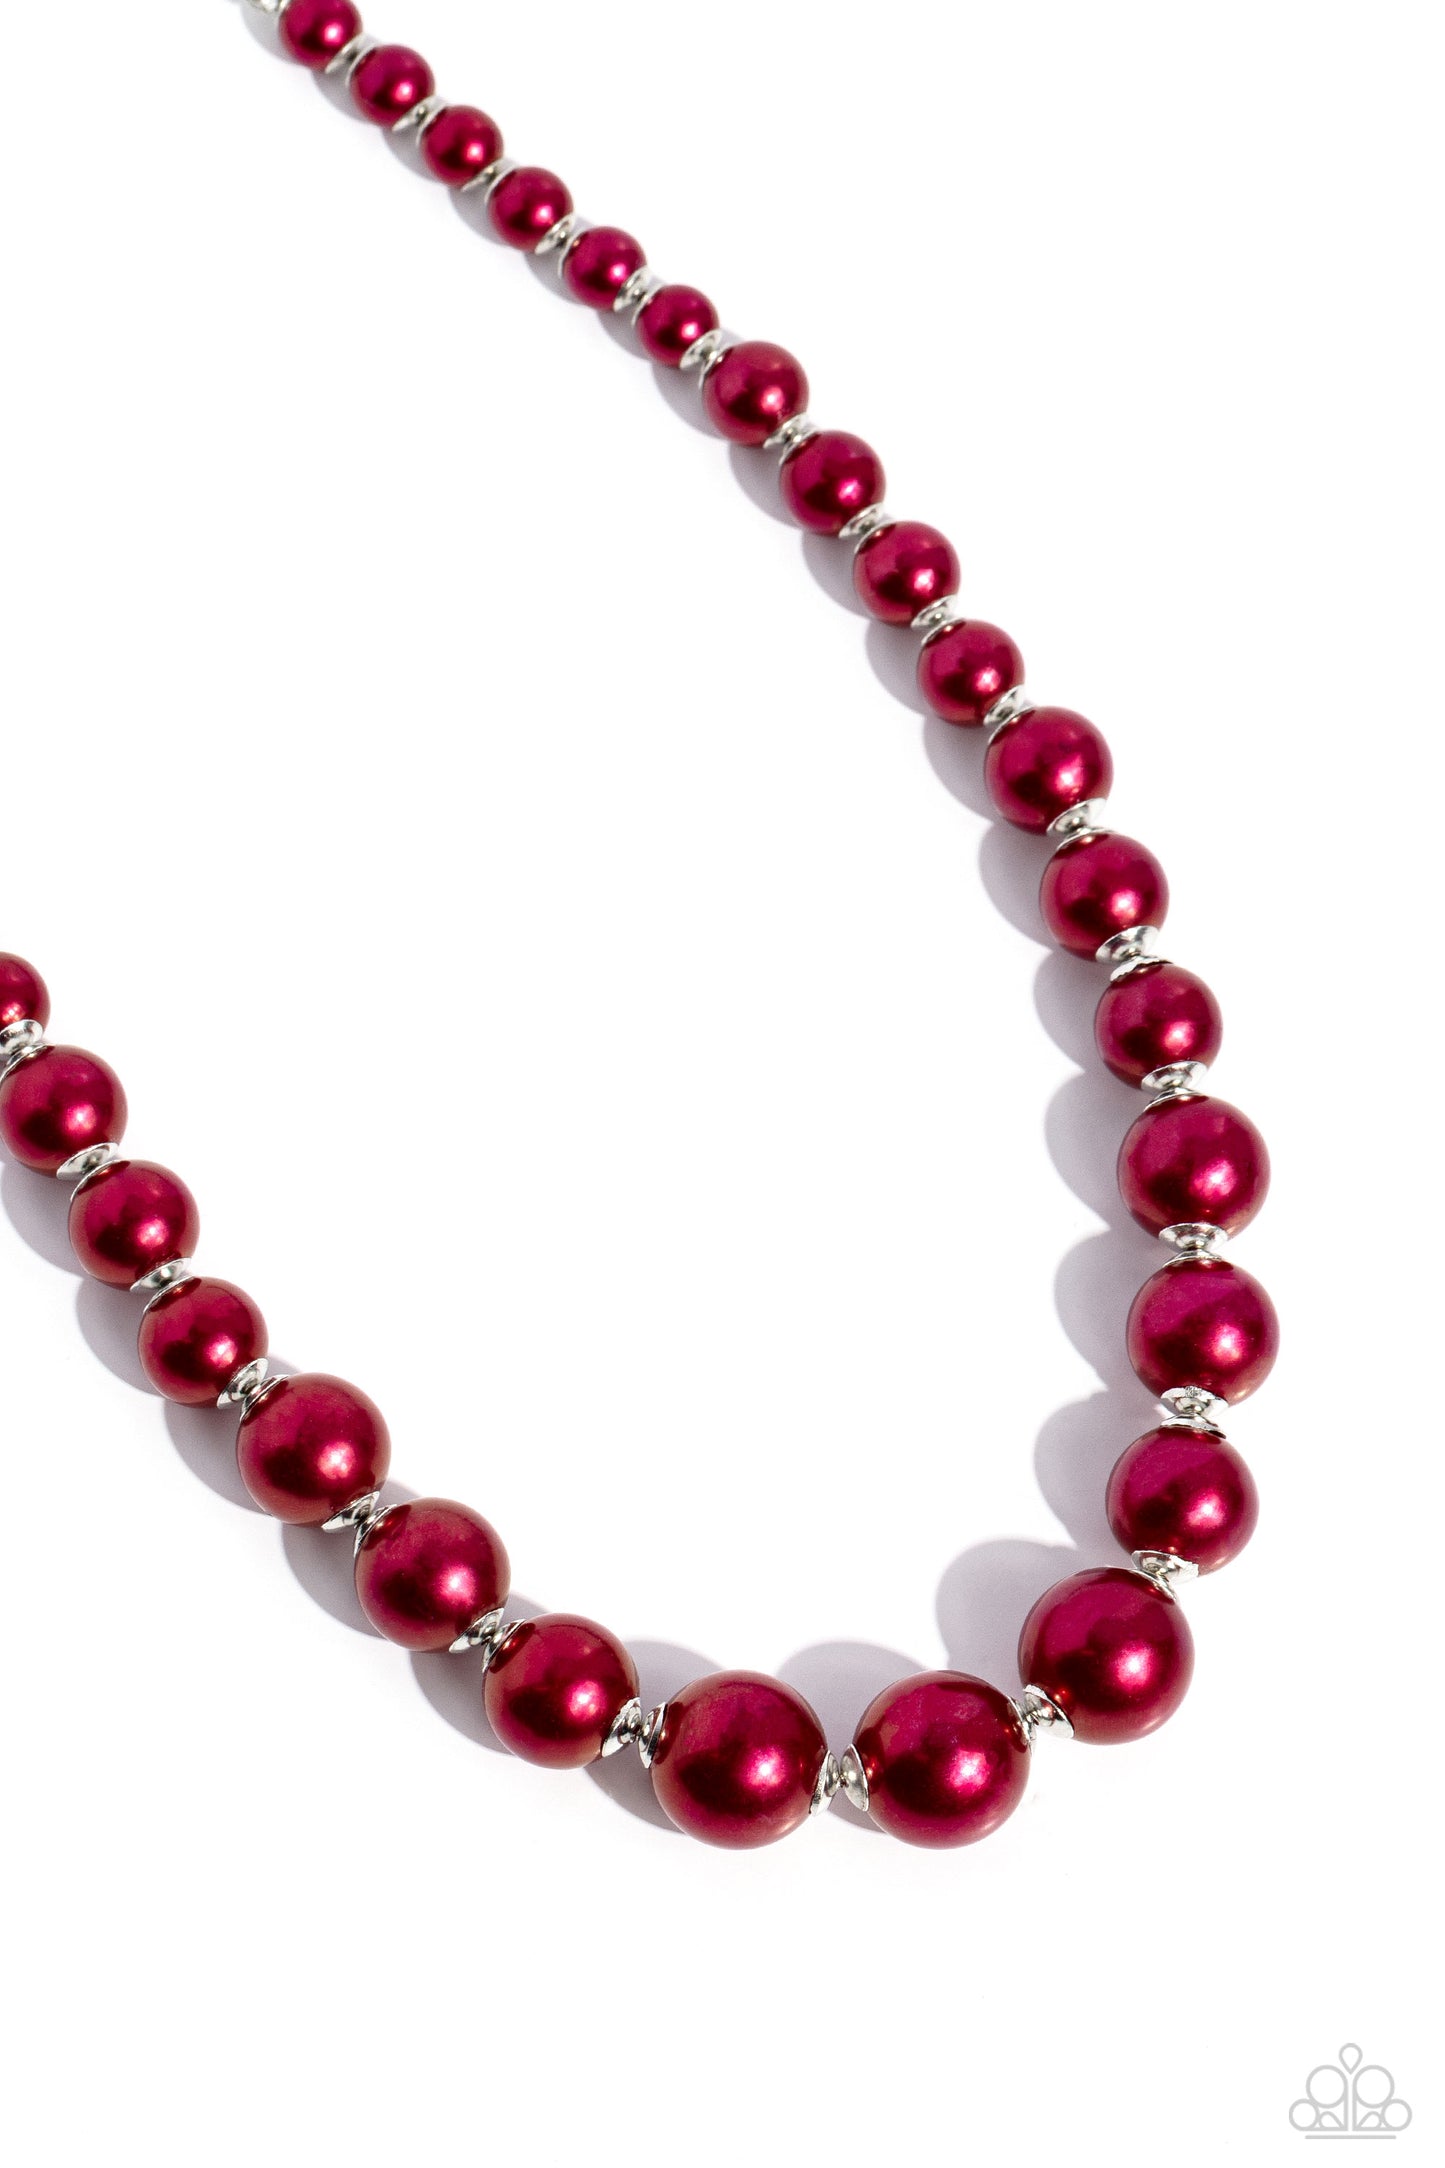 Manhattan Mogul Red Pearl Necklace - Paparazzi Accessories  A single strand of rich red pearls elegantly cascades below the collar, creating a glamorous graceful effect. Features an adjustable clasp closure.  Sold as one individual necklace. Includes one pair of matching earrings.  P2RE-RDXX-251XX